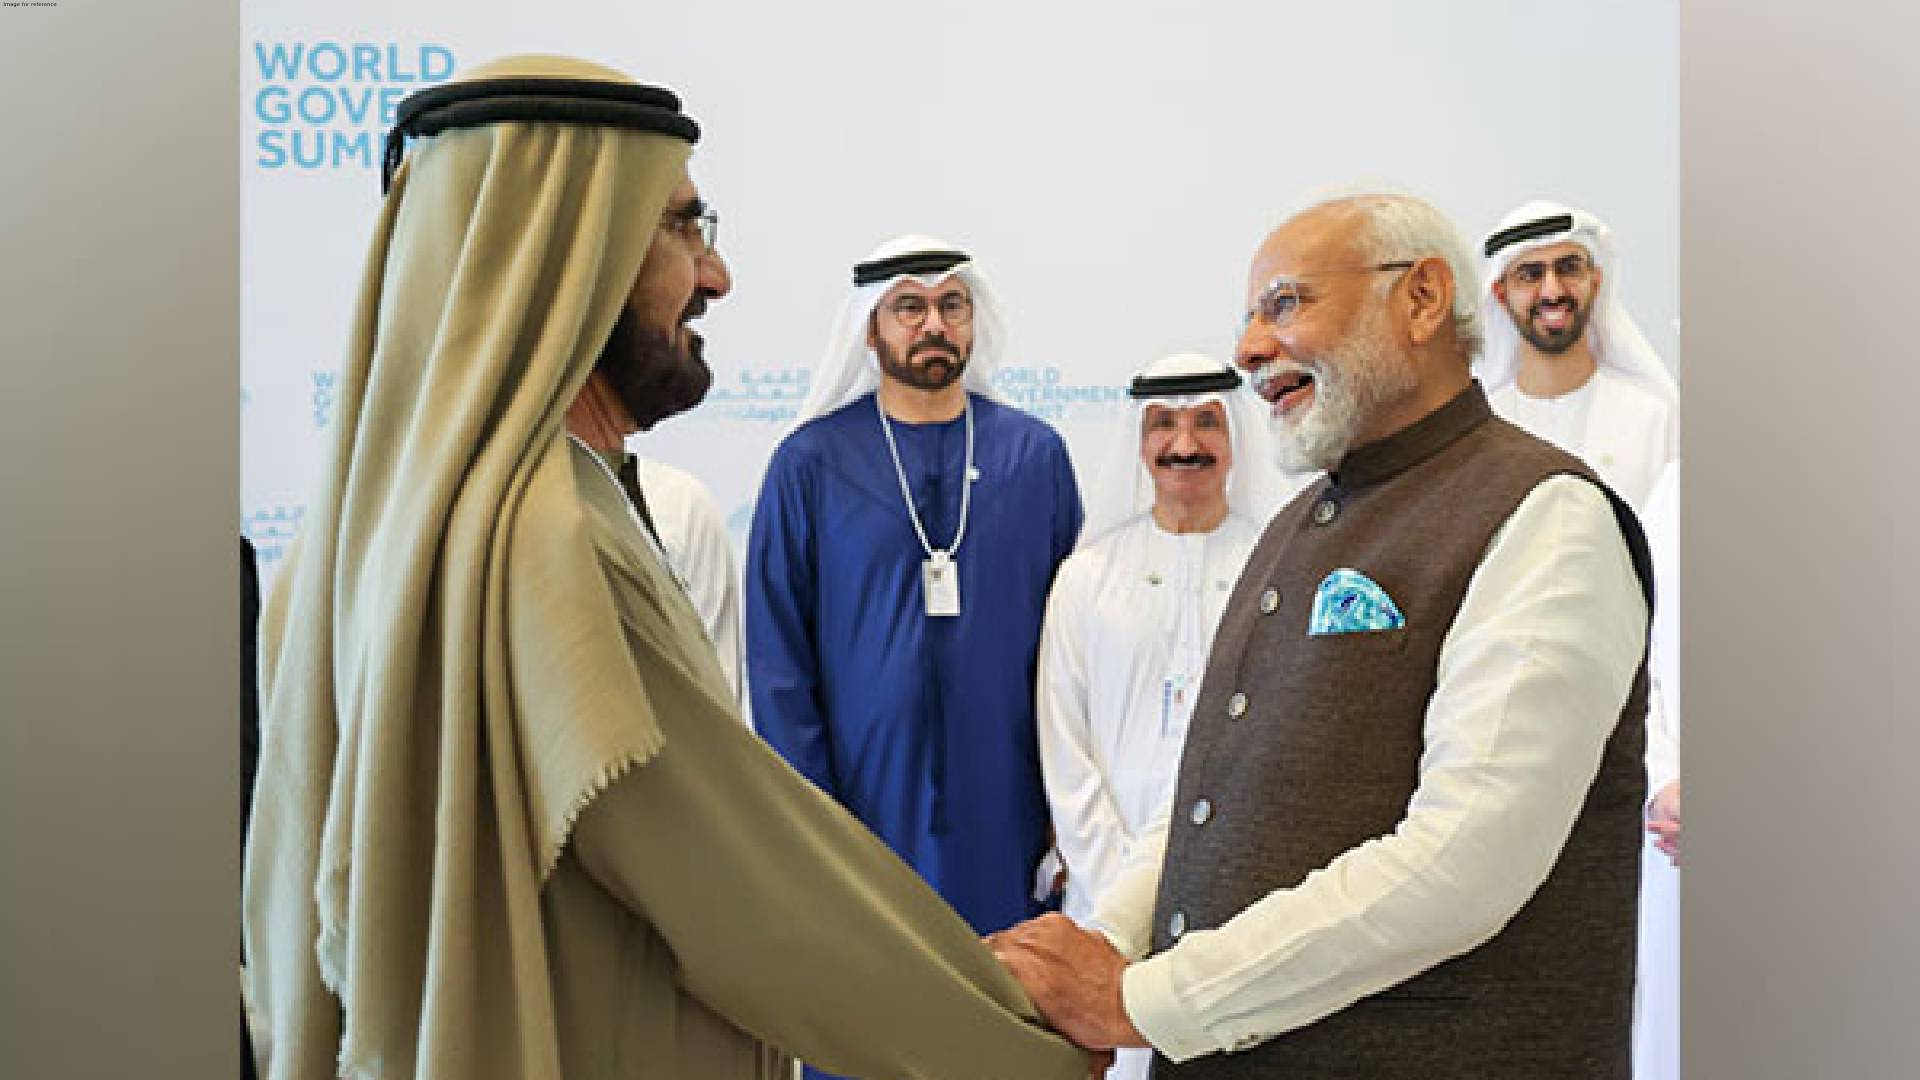 UAE Vice President presents copy of his book, personalised message to PM Modi